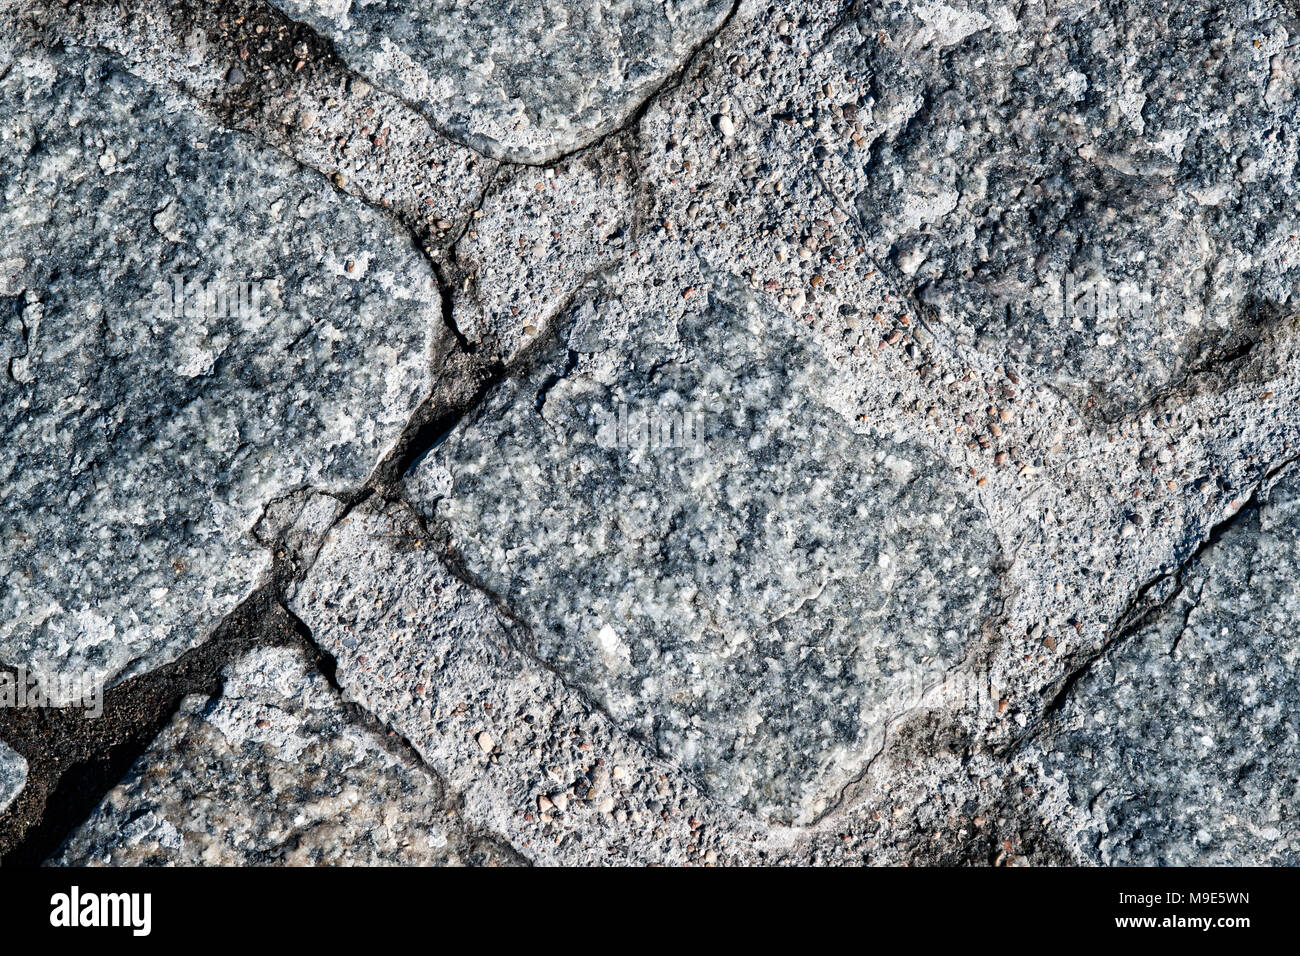 Texture of a hard rock stone paving blocks of grey and blue colors. Grunge rough surface Stock Photo